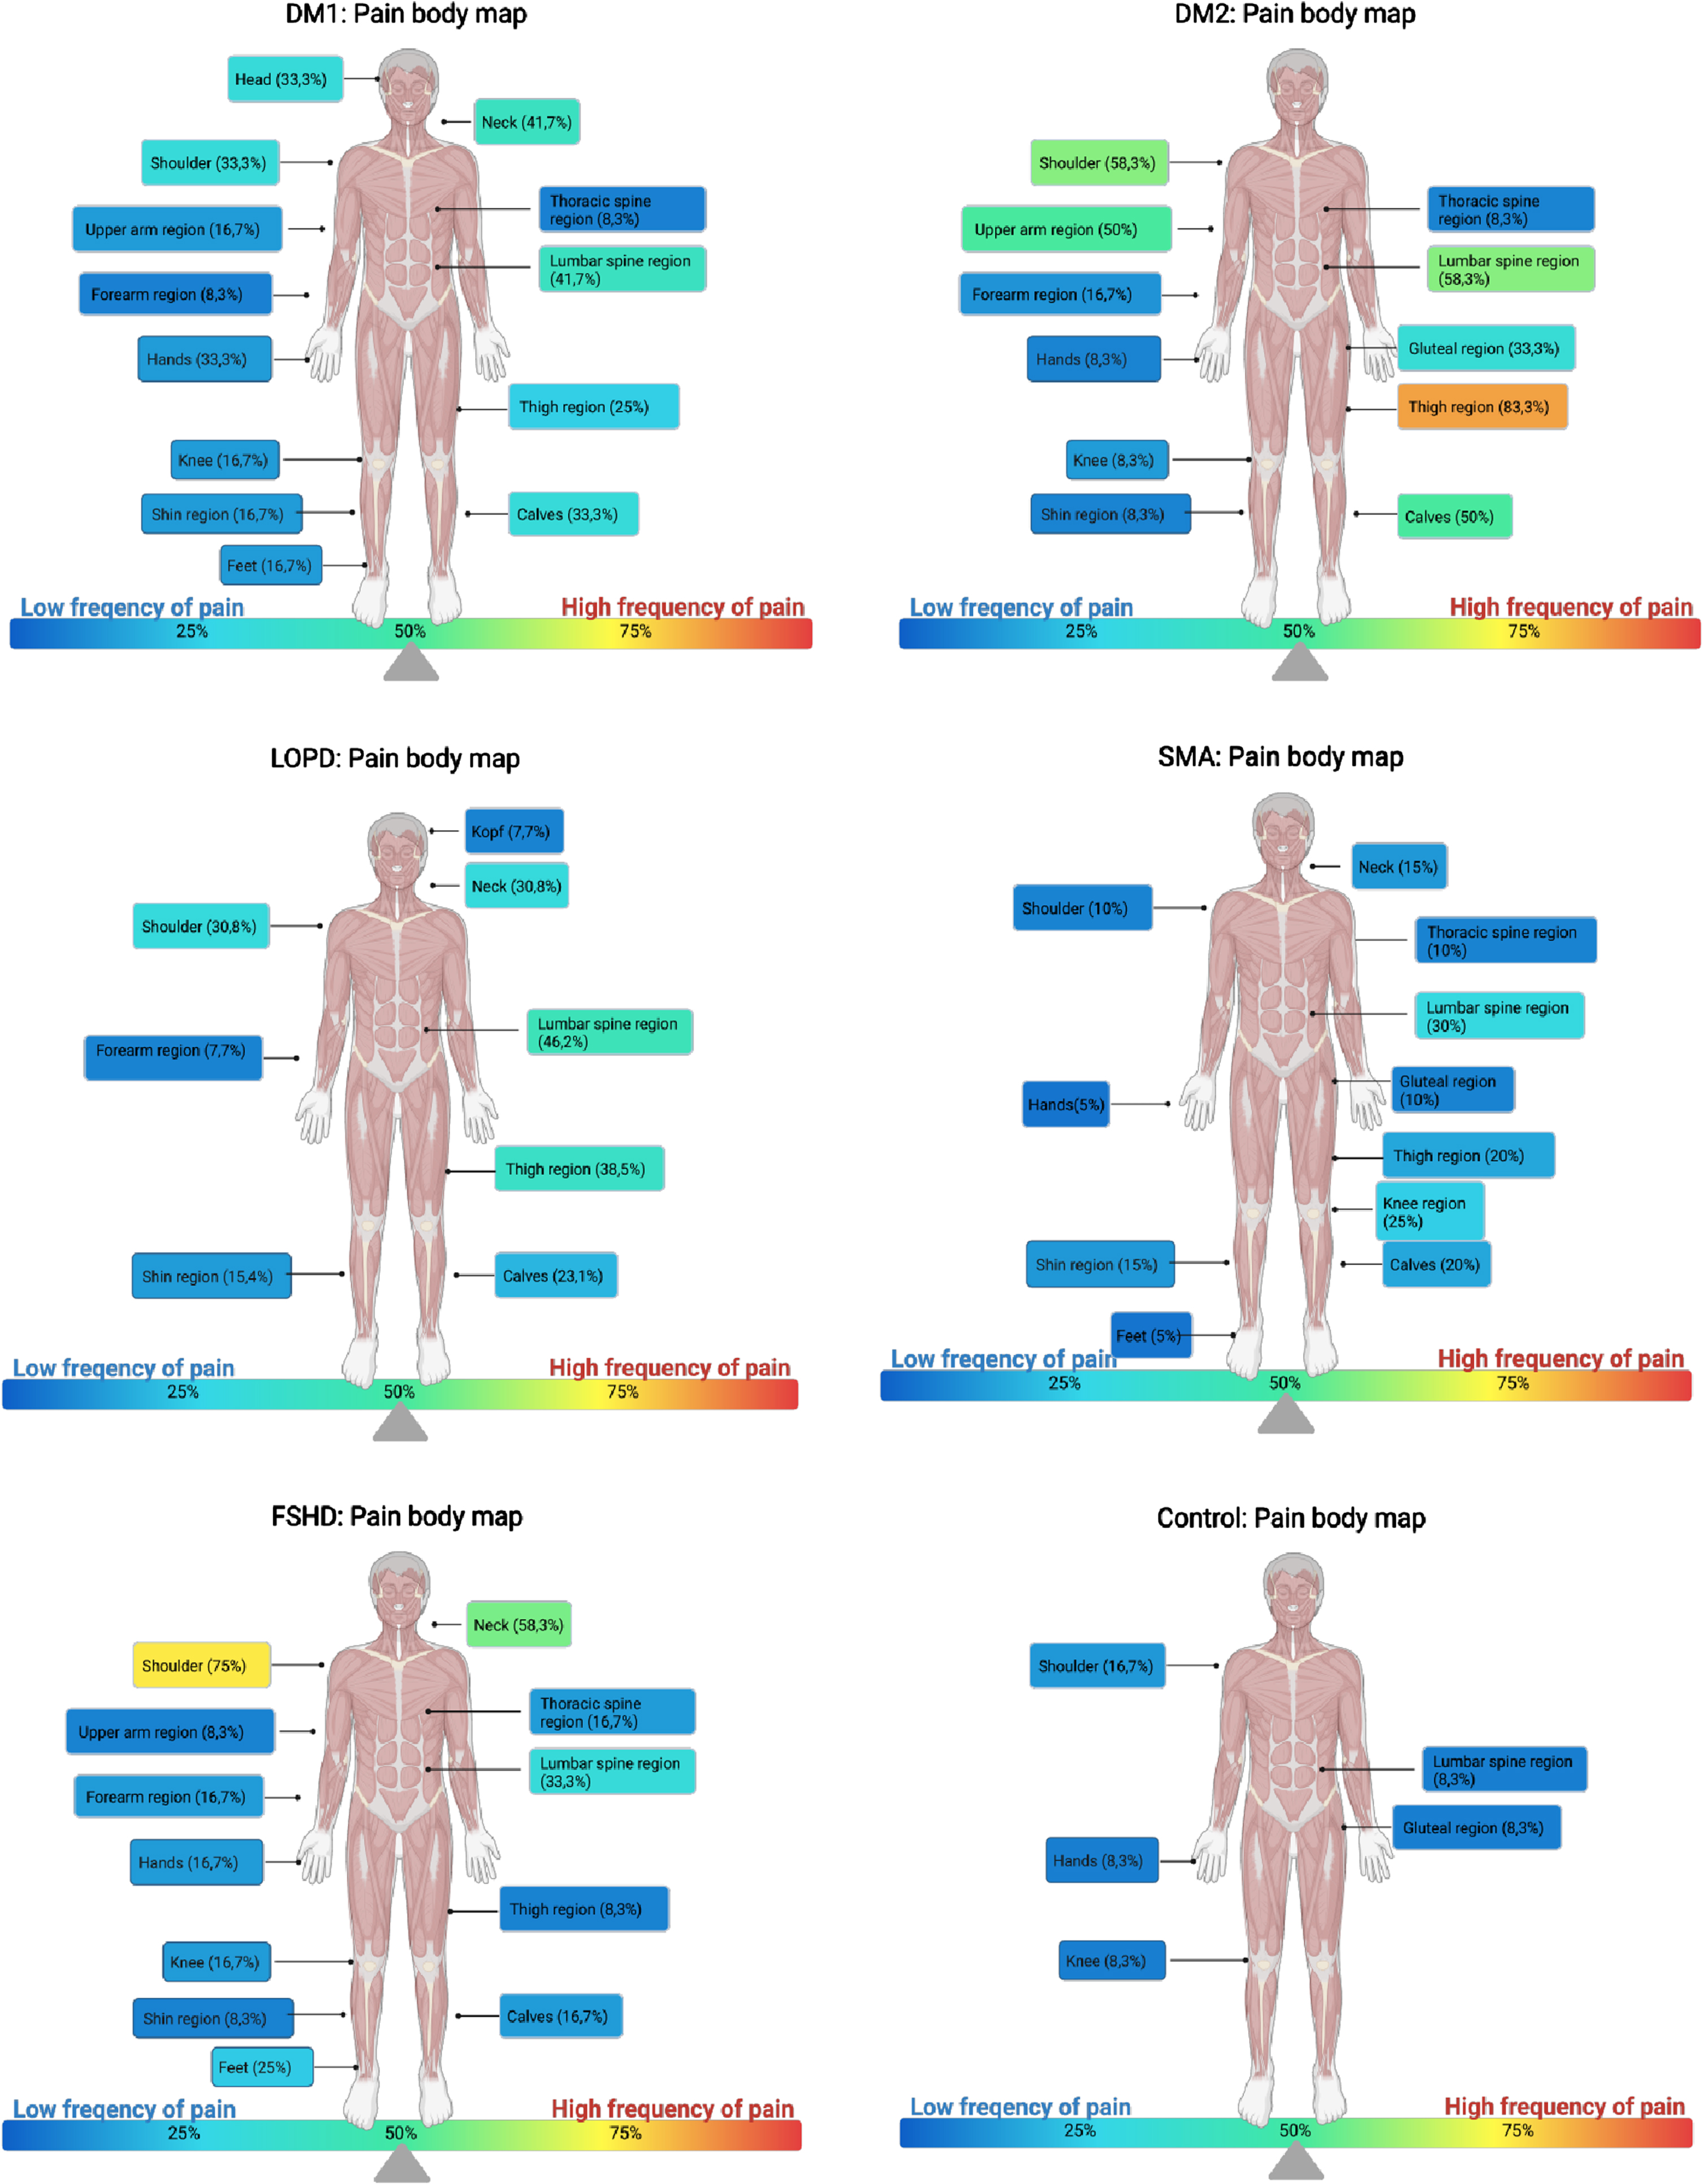 Pain body maps for the different subgroups DM1 (picture 1), DM2 (picture 2), LOPD (picture 3), SMA (picture 4), FSHD (picture 5) and the control group (picture 6) indicating the frequency of pain in different colors from a low frequency (blue) to a high frequency (red) in different locations.